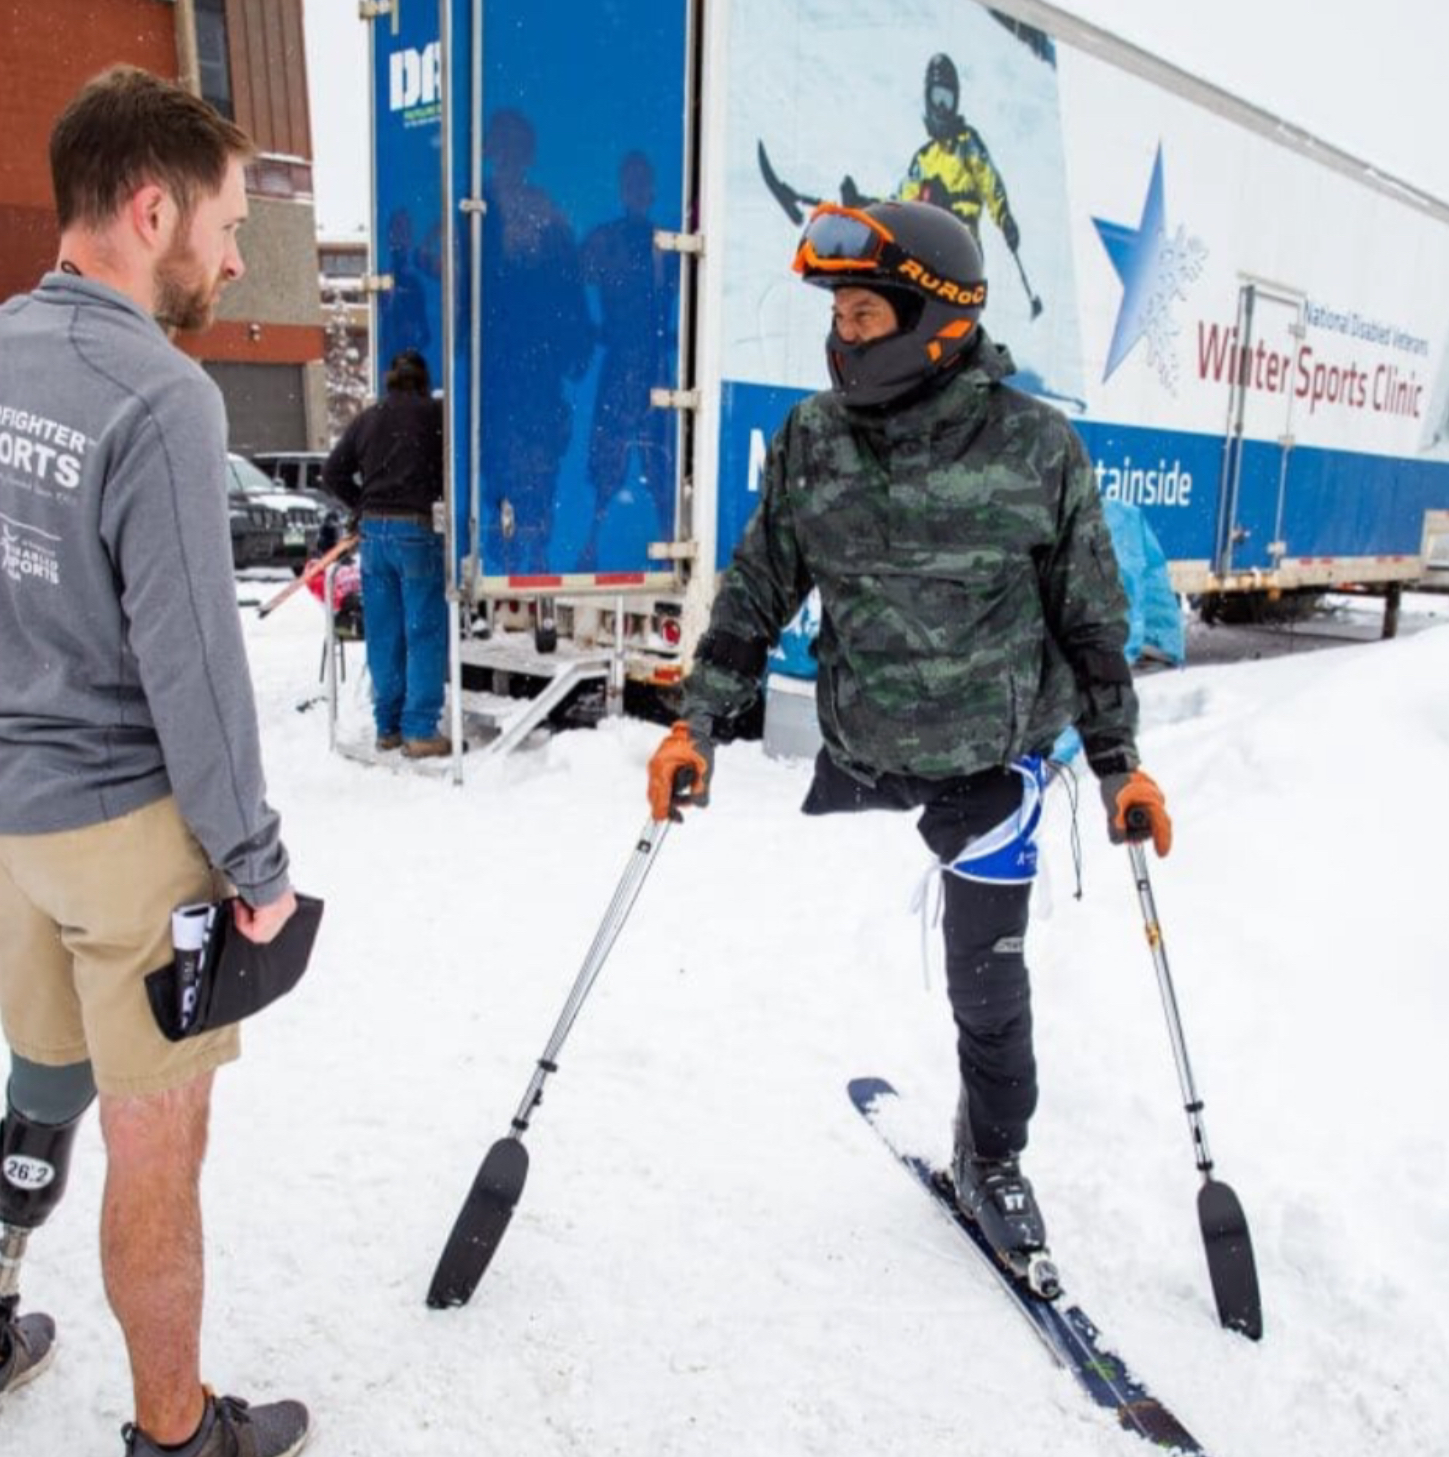 Male skier with right leg amputation talking to another athlete